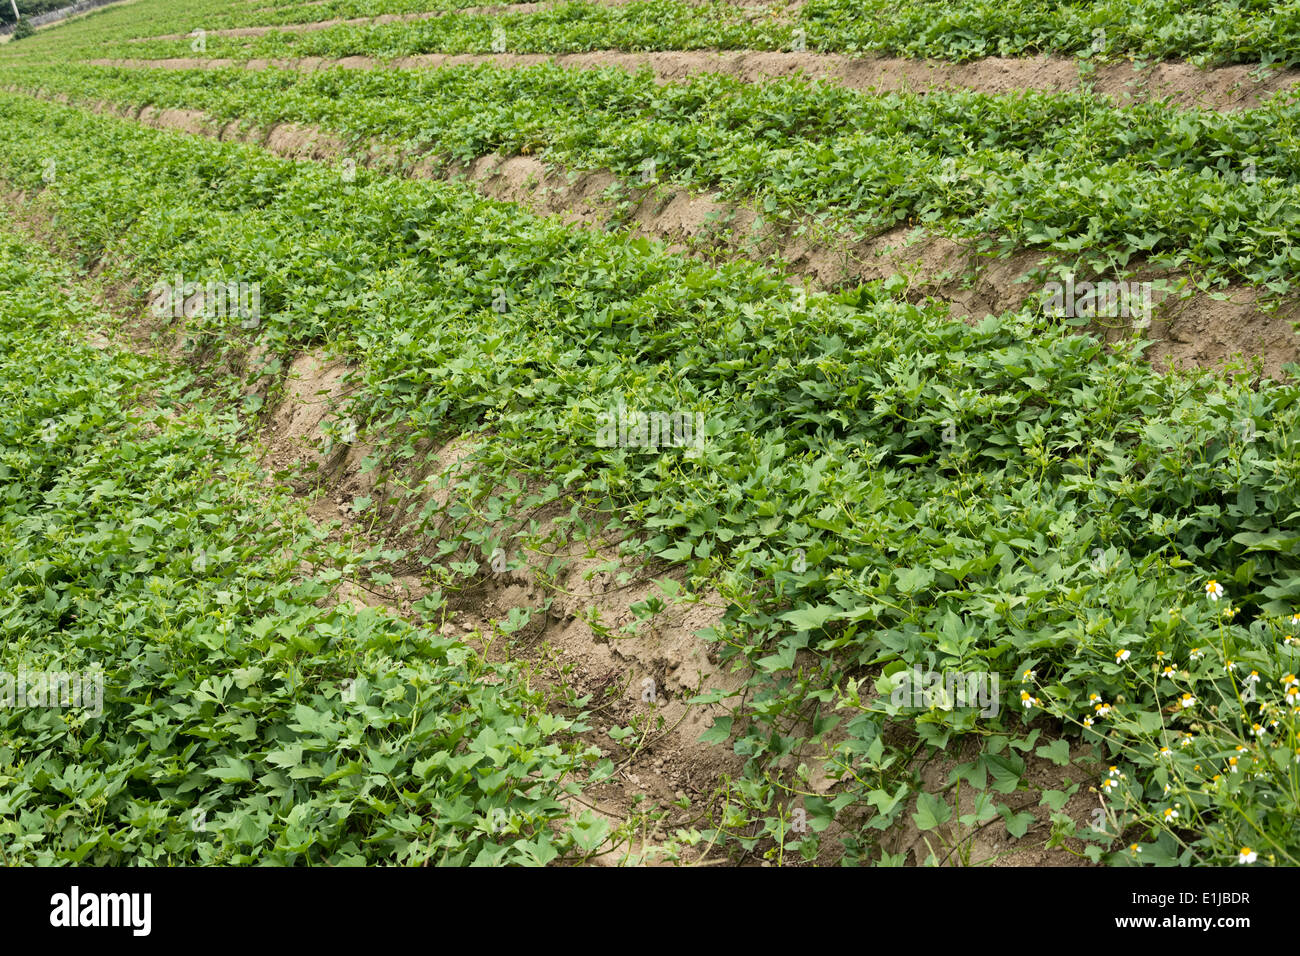 Cultivated land Stock Photo